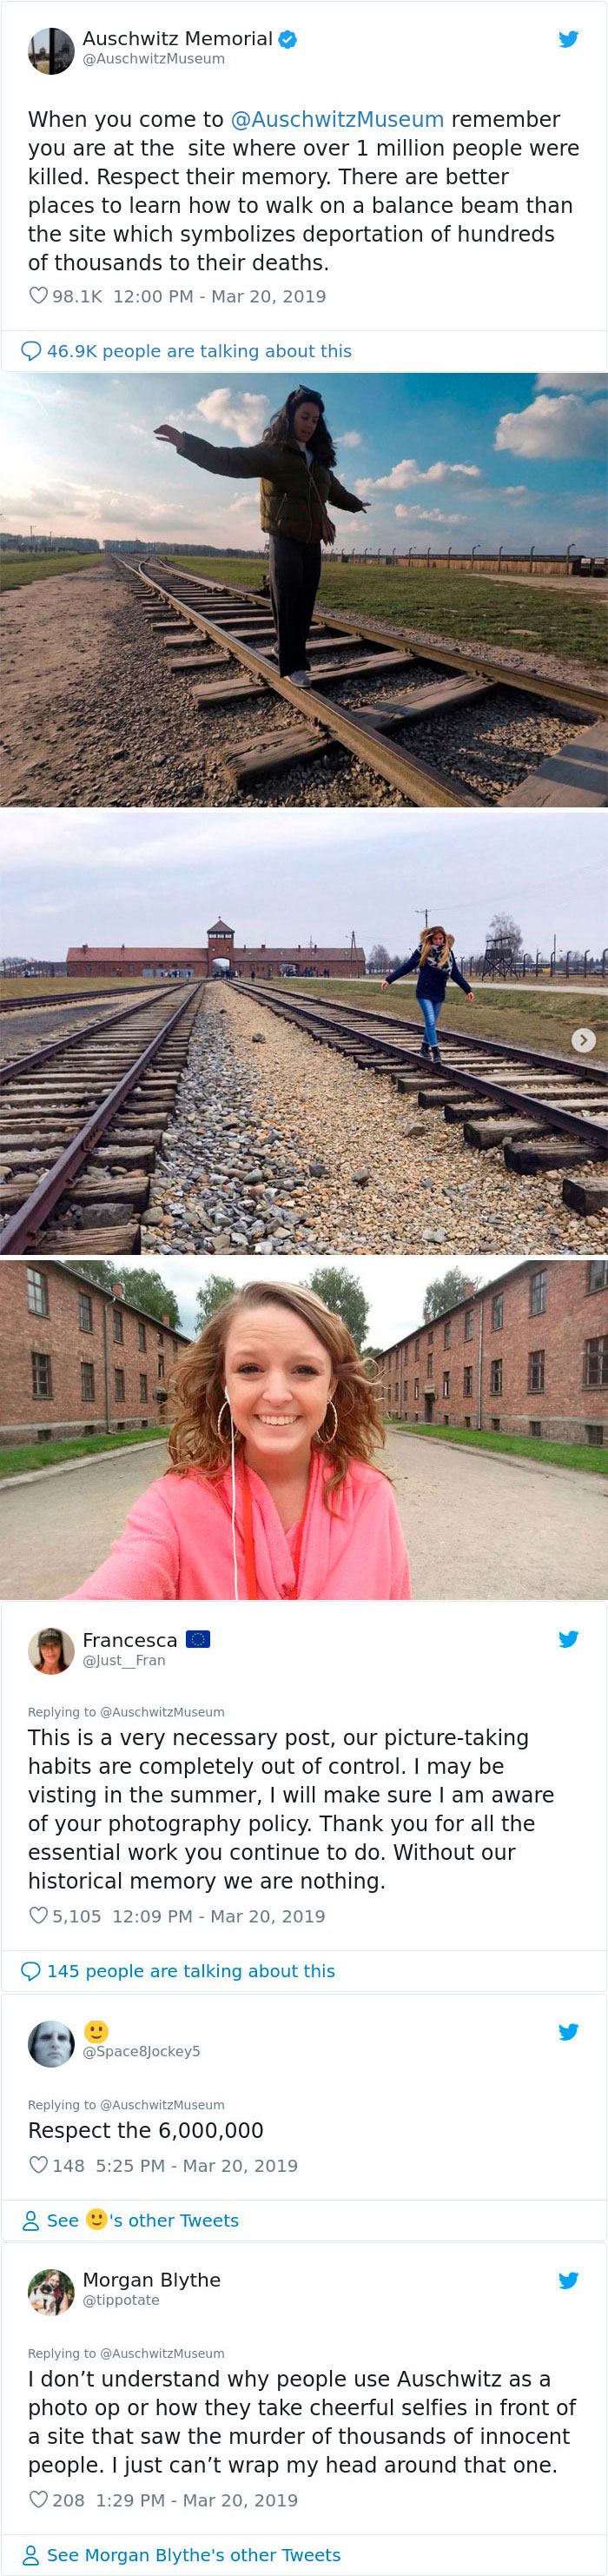 When You Come To Auschwitz Museum Remember You Are At The Site Where Over 1 Million People Were Killed. Respect Their Memory. There Are Better Places To Learn How To Walk On A Balance Beam Than The Site Which Symbolizes Deportation Of Hundreds Of Thousands To Their Deaths